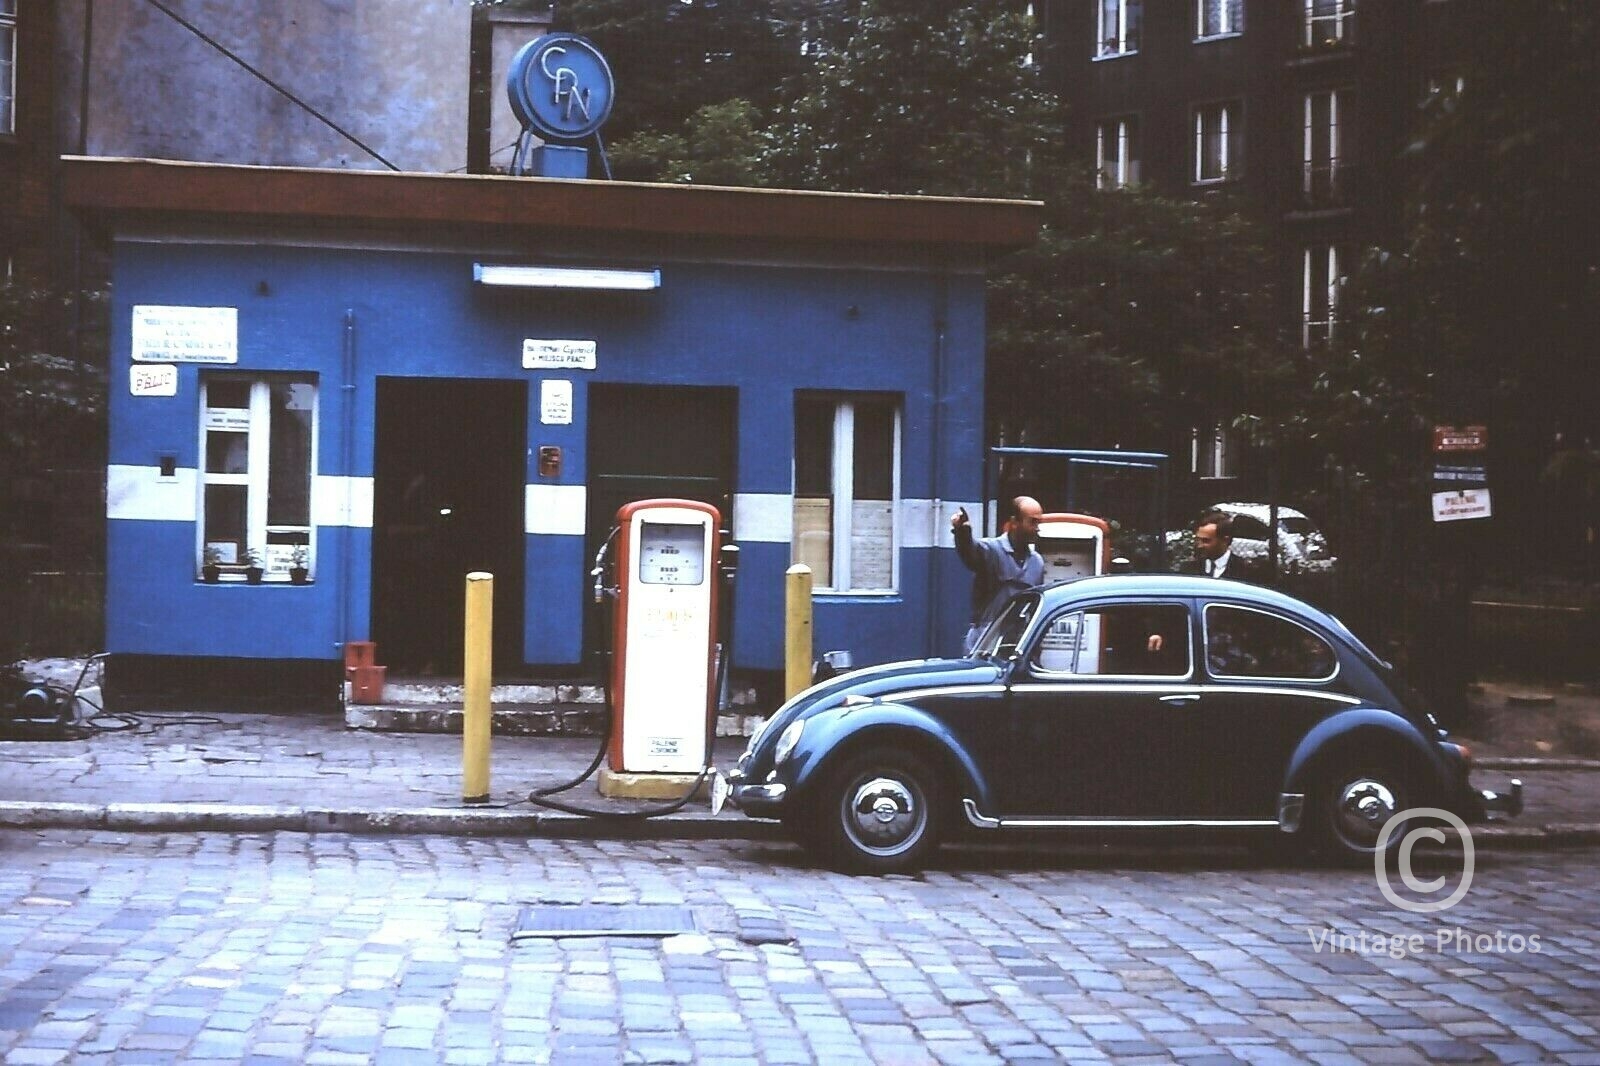 1960s CPN Gas Station, VW Car Re-Fueling